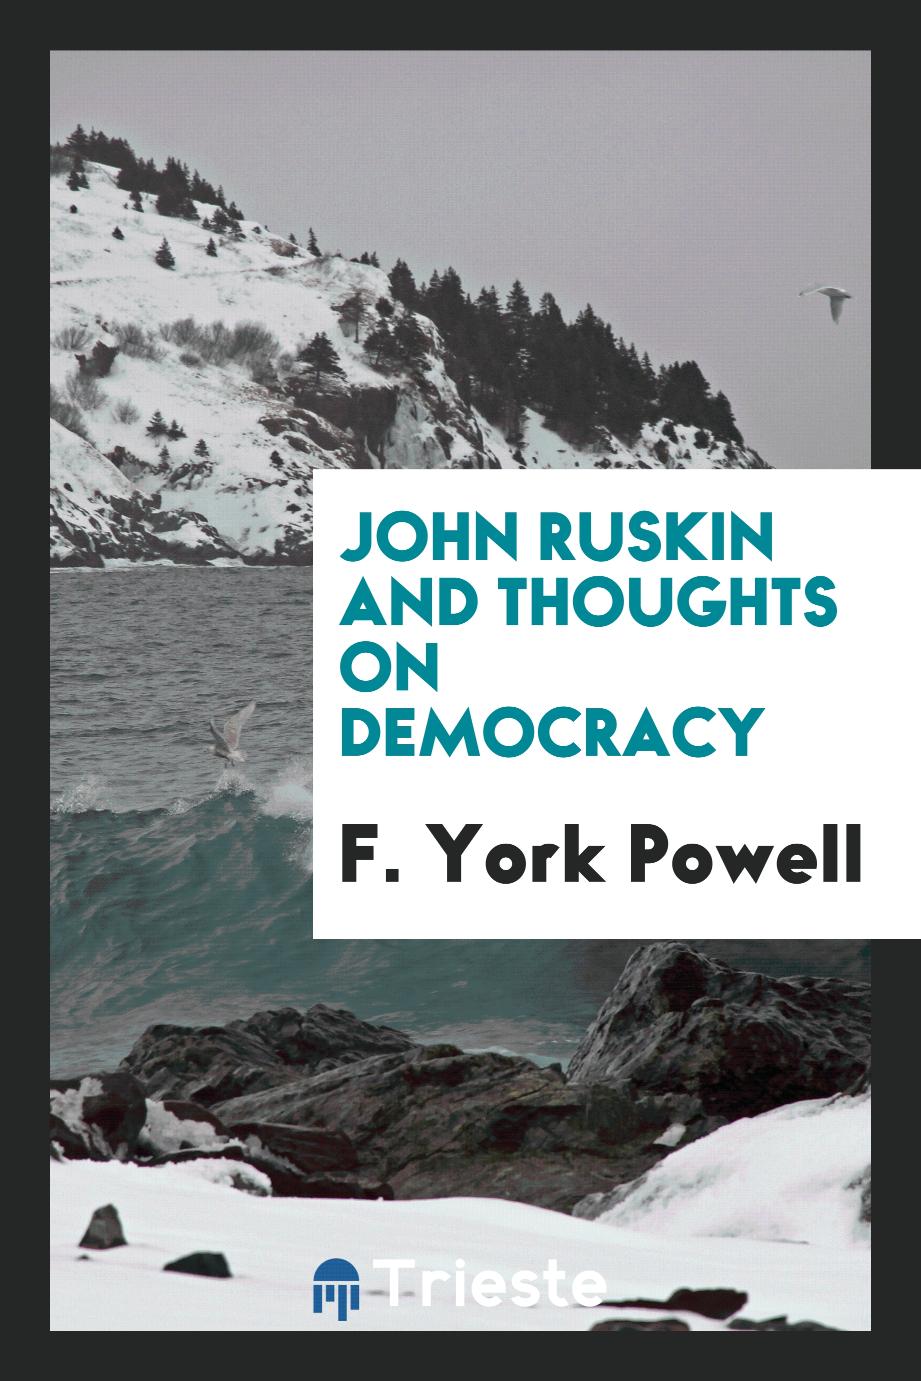 John Ruskin and thoughts on democracy